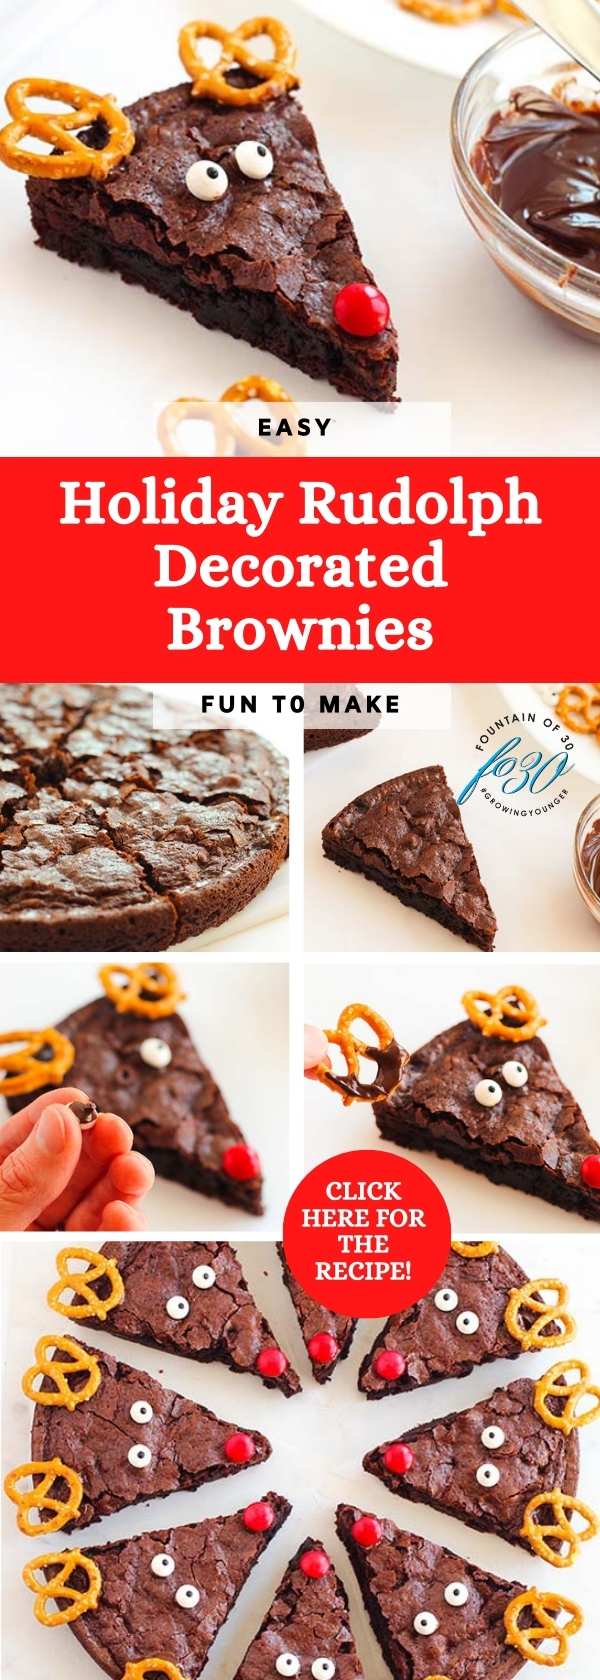 rudolph decorated brownies easy recipe fountainof30